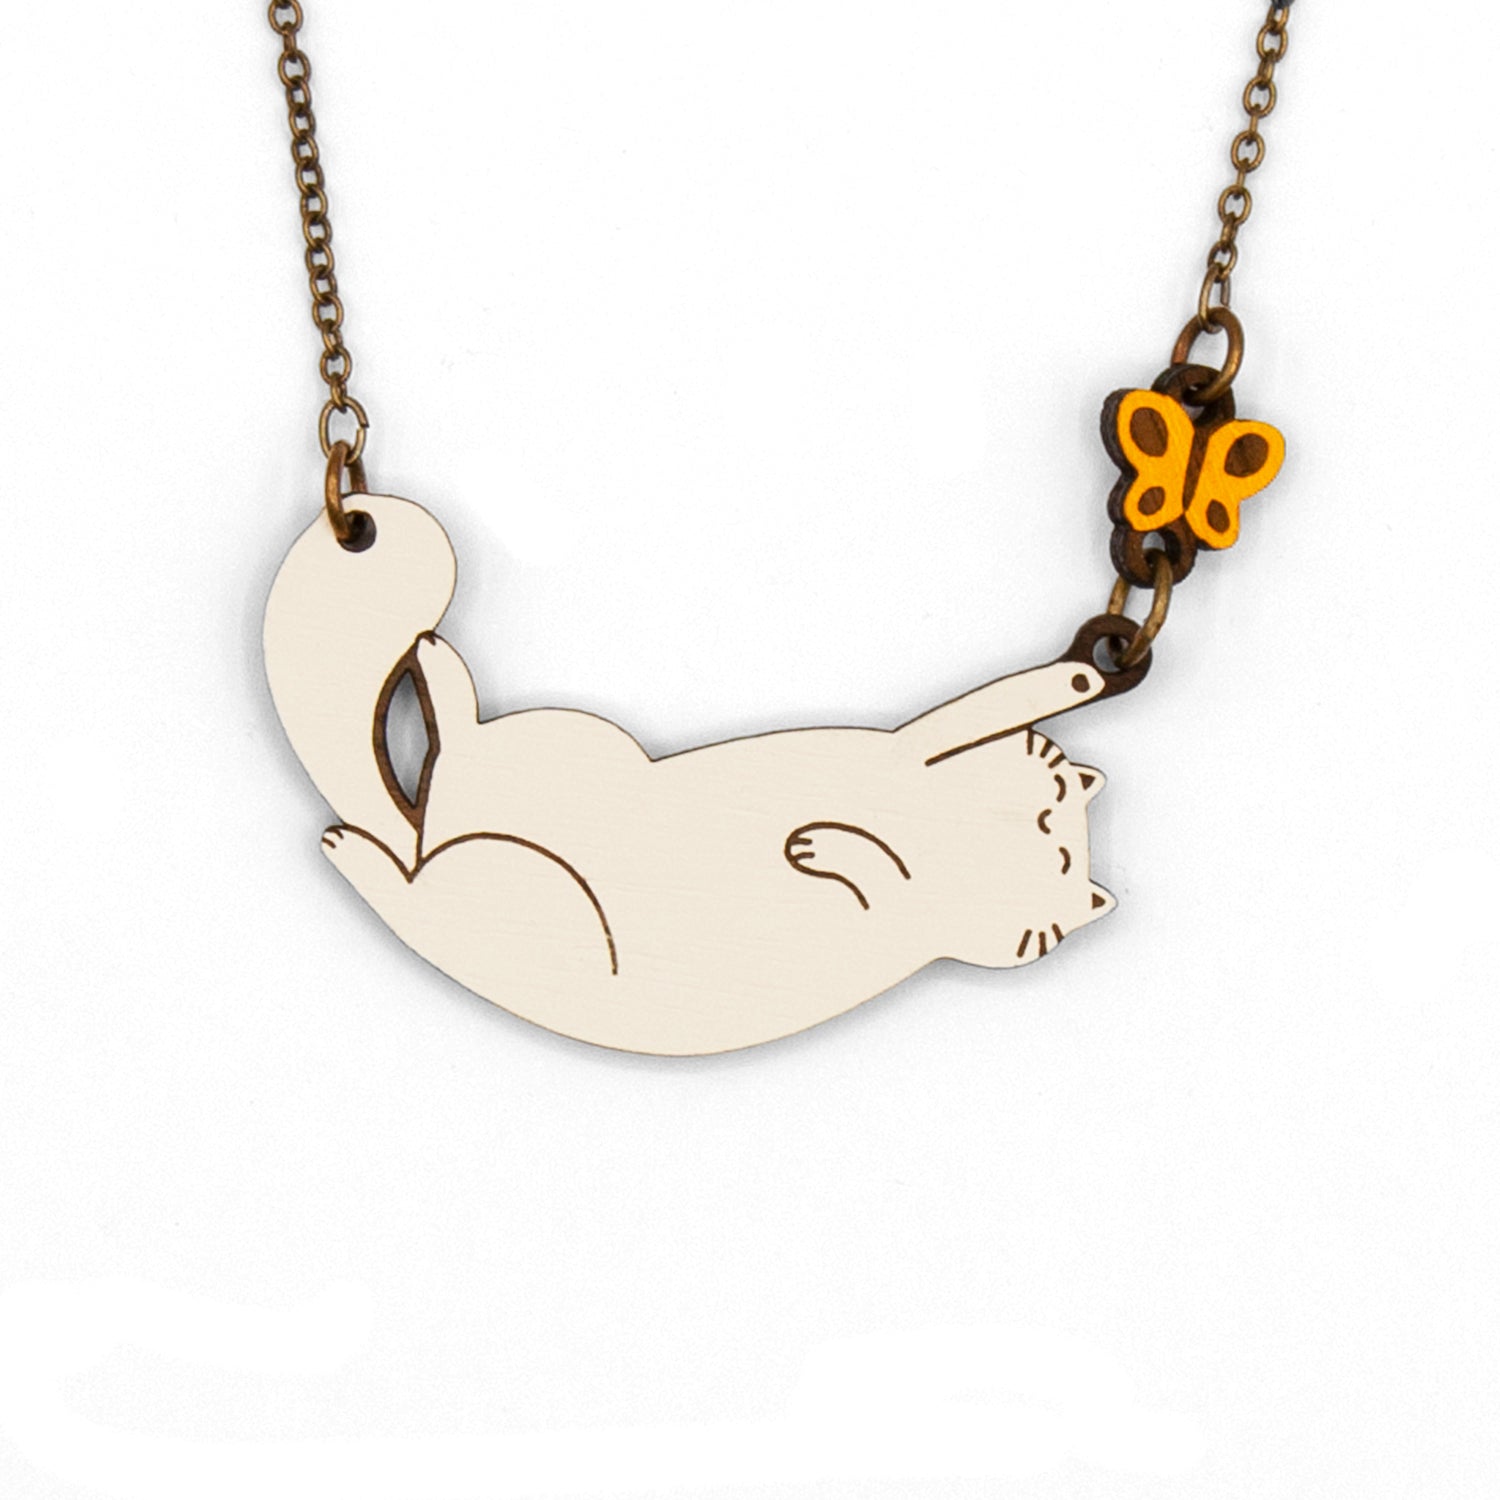 Cat with Butterfly Necklace - The Nancy Smillie Shop - Art, Jewellery & Designer Gifts Glasgow